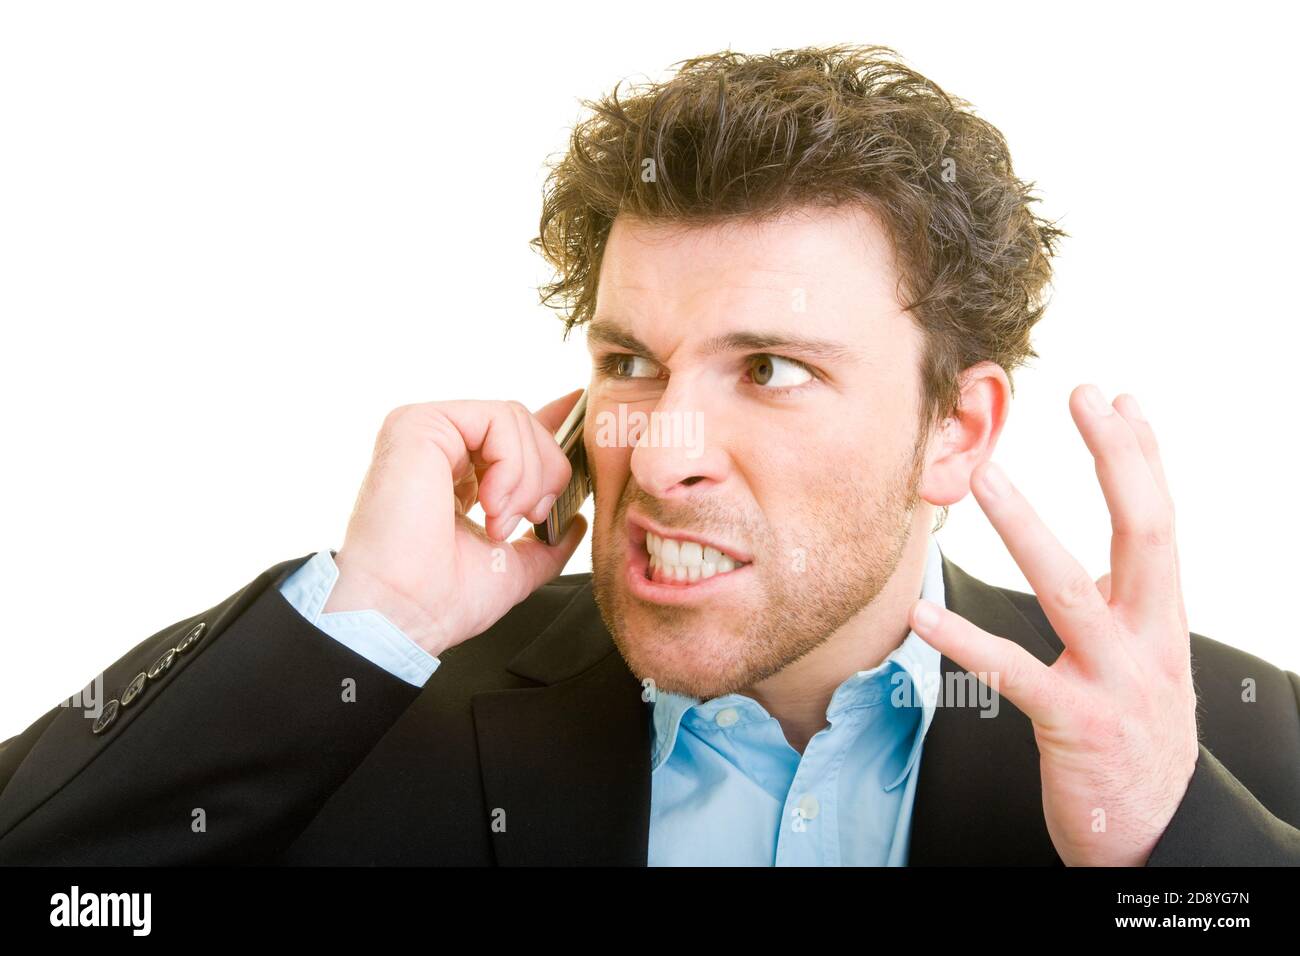 Young man in business attire is angry on his cellphone Stock Photo